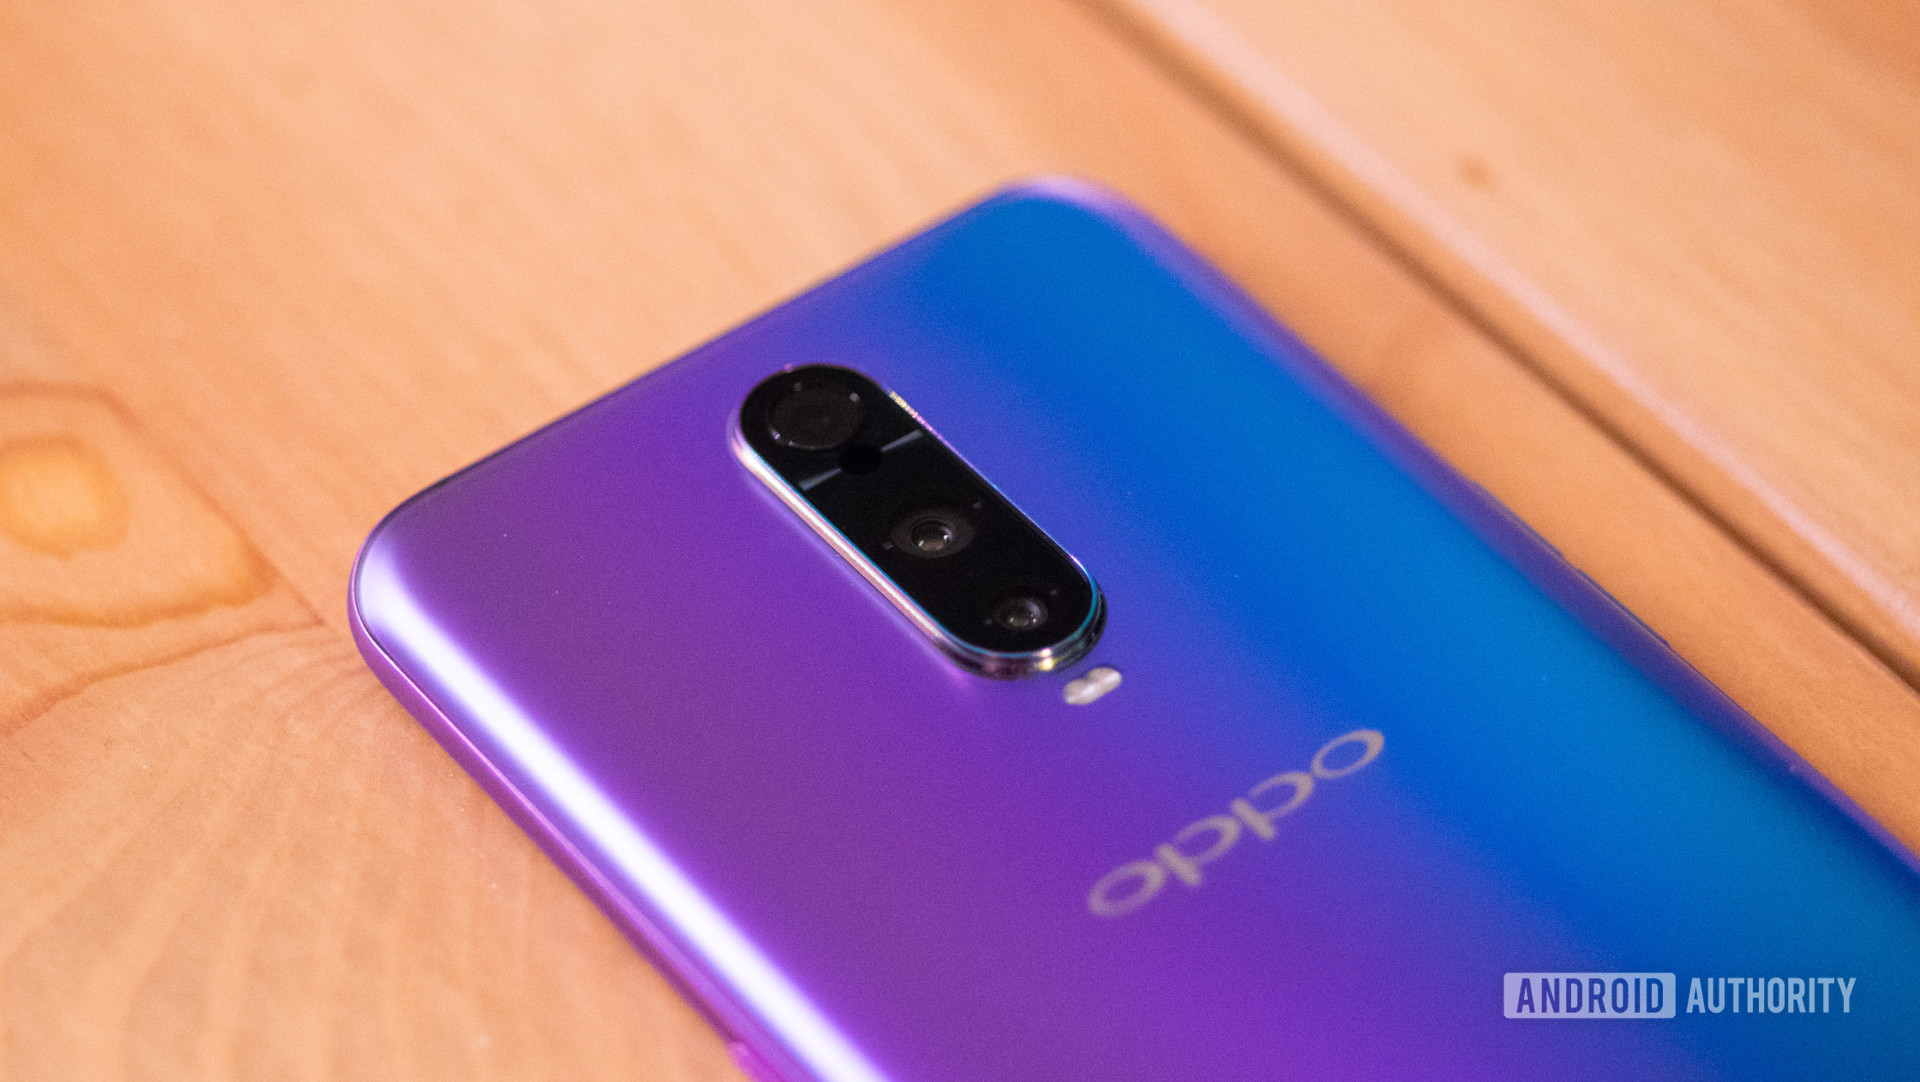 The back of the OPPO R17 Pro